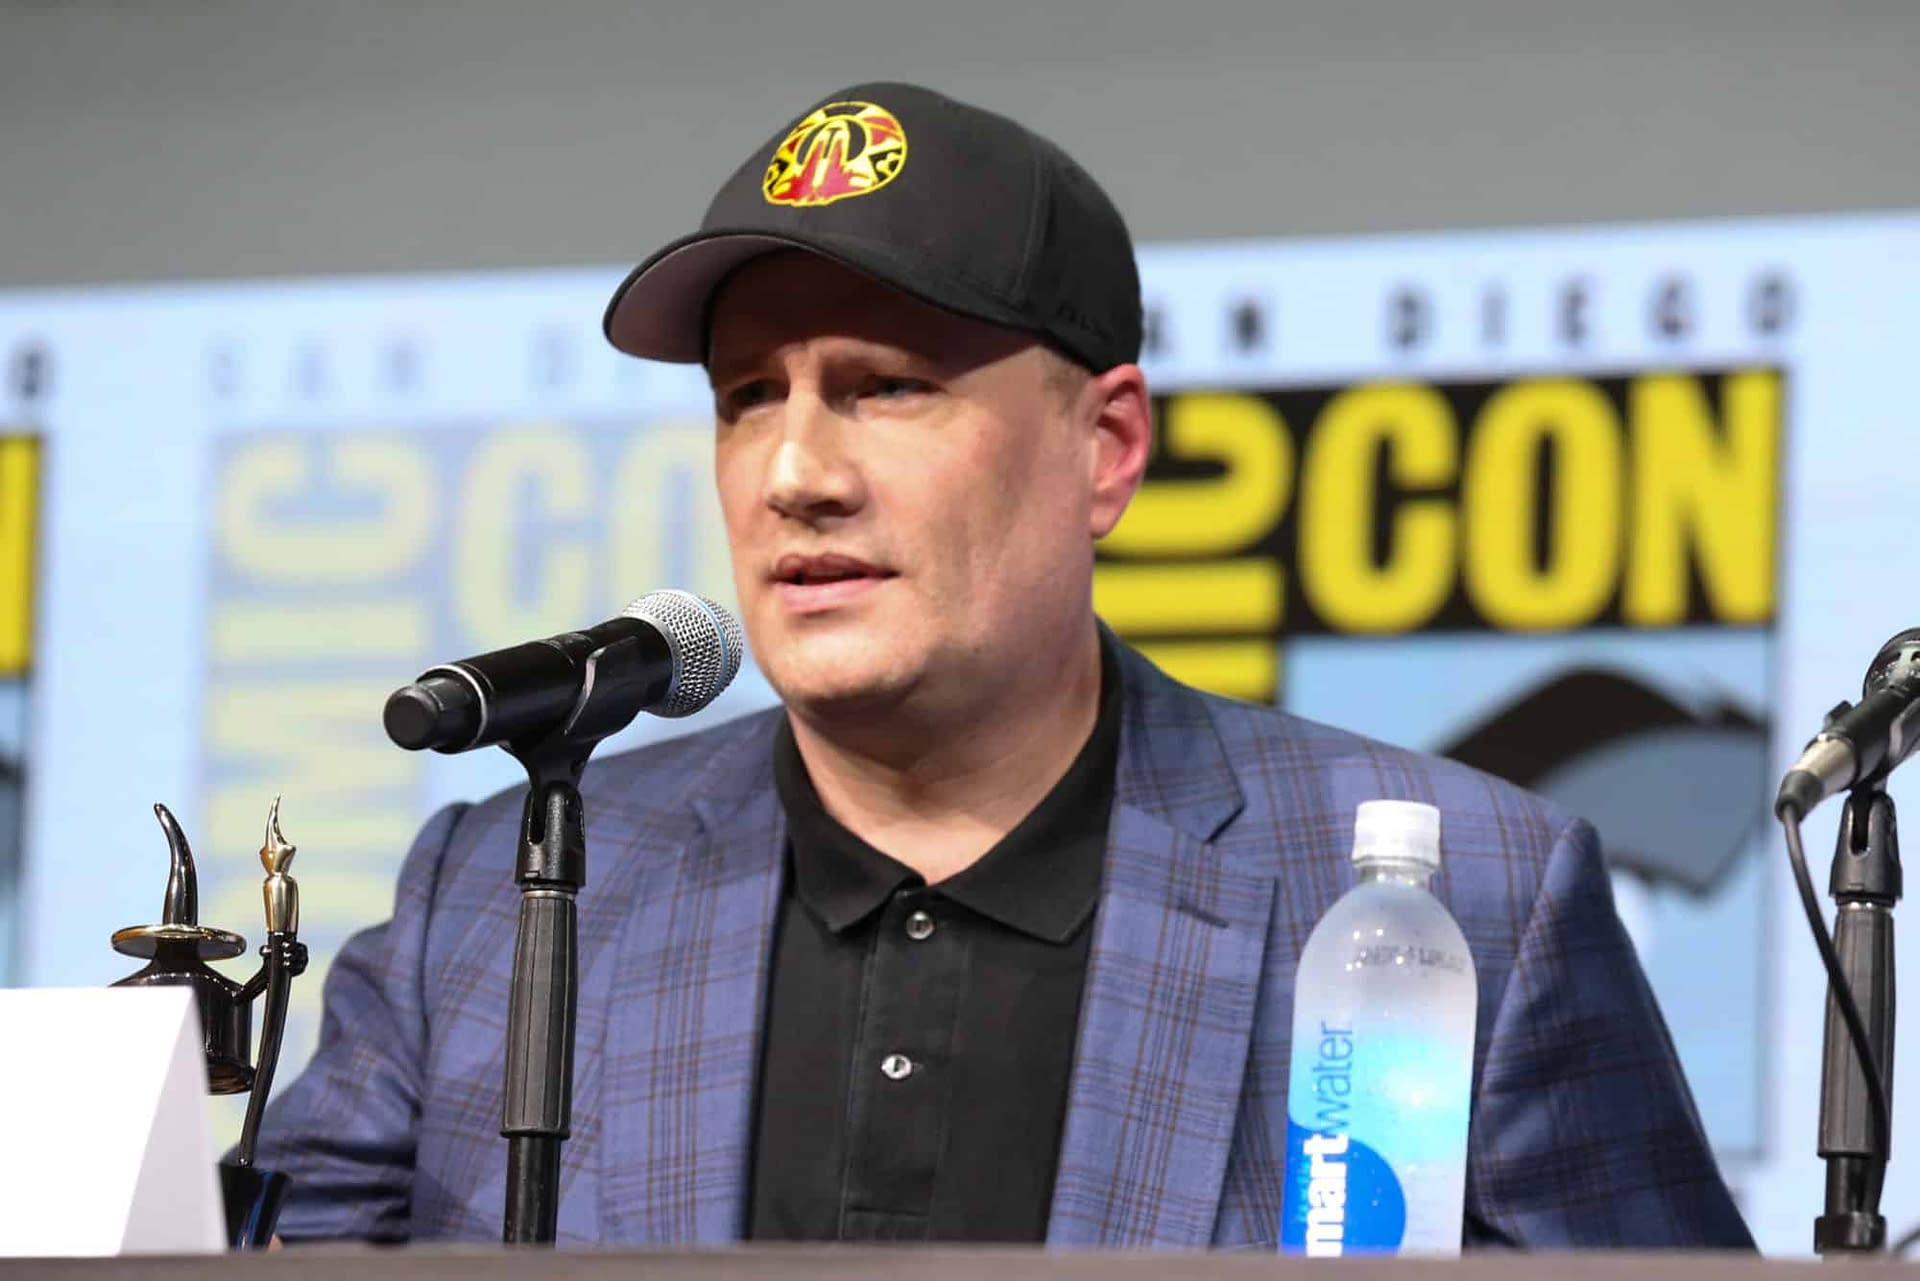 Marvel Movies Will Have More Female Directors in the Future, According to Kevin Feige